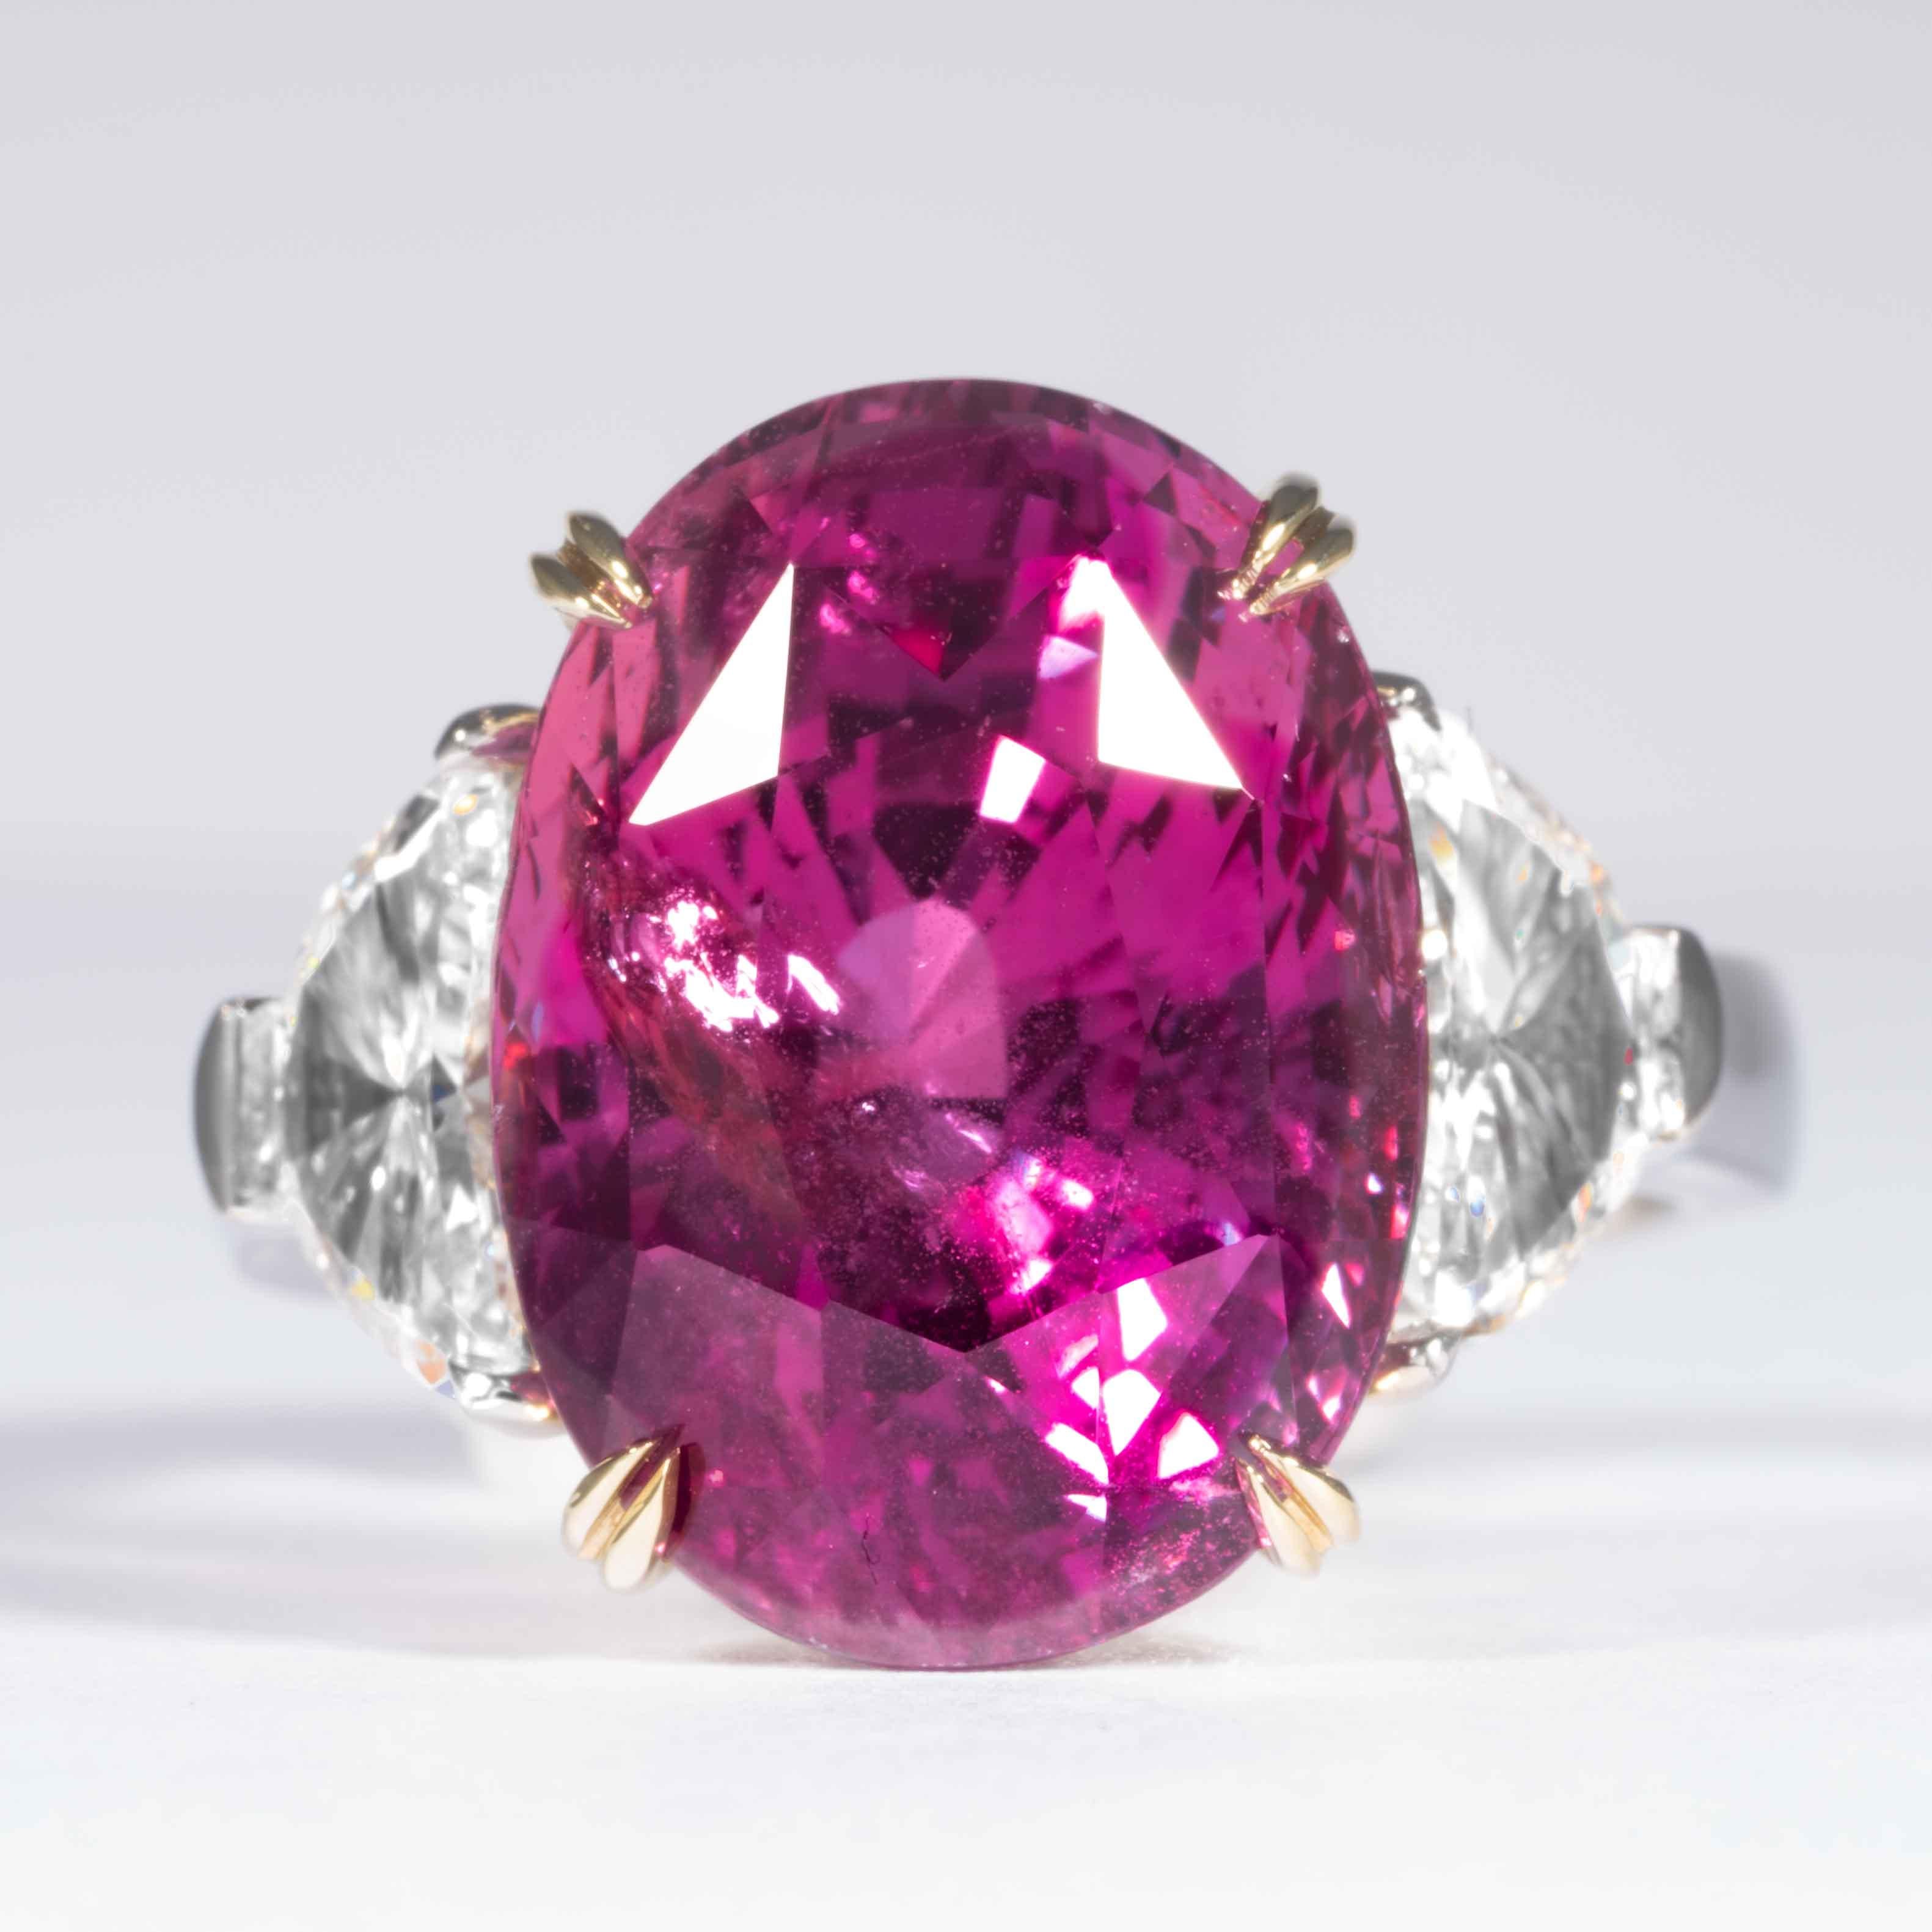 This sapphire and diamond 3-stone ring is offered by Shreve, Crump & Low.  This oval cut pink sapphire is custom set in a handcrafted Shreve, Crump & Low 3-stone platinum ring. This vibrant pink oval cut sapphire measures 16.14 x 11.73 x 10.51 mm